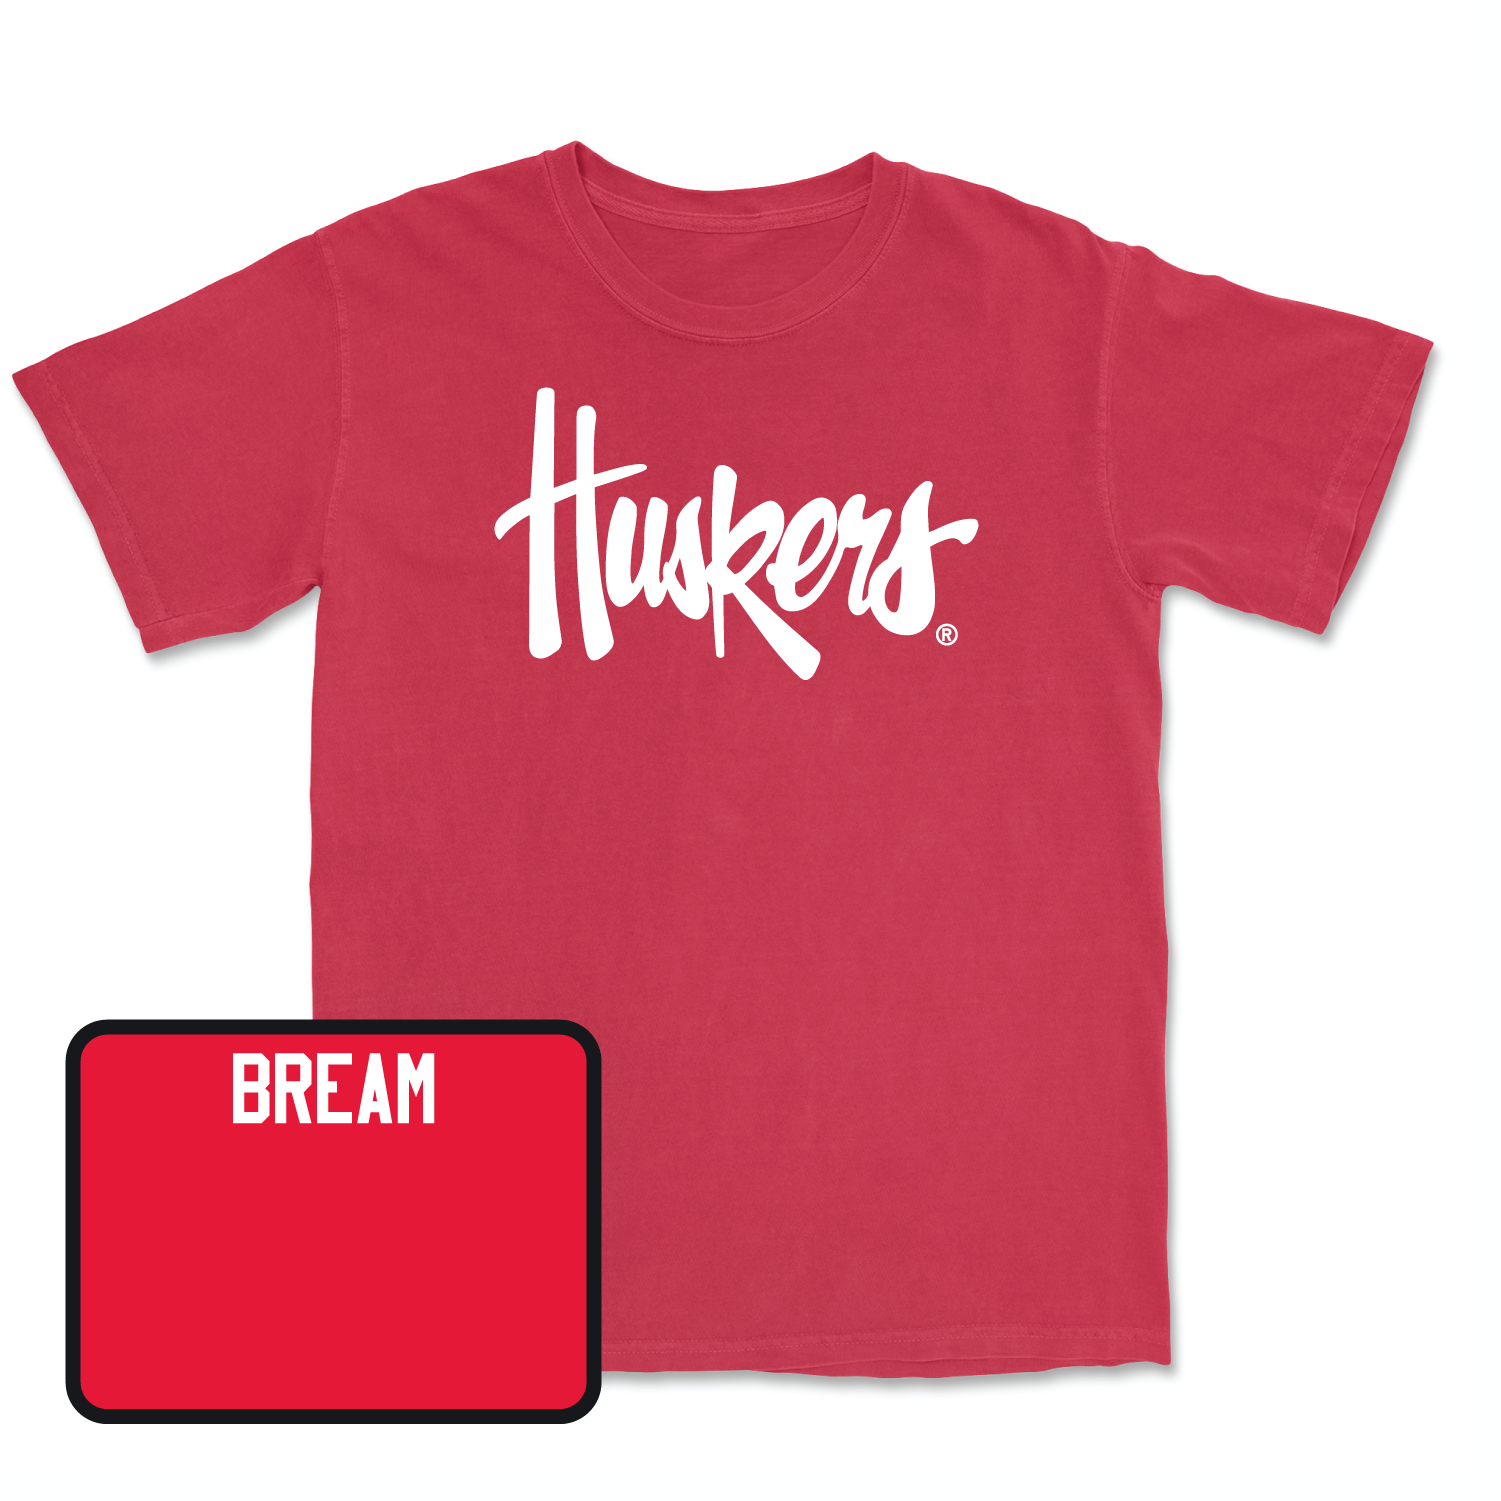 Red Women's Golf Huskers Tee Large / Brooke Bream